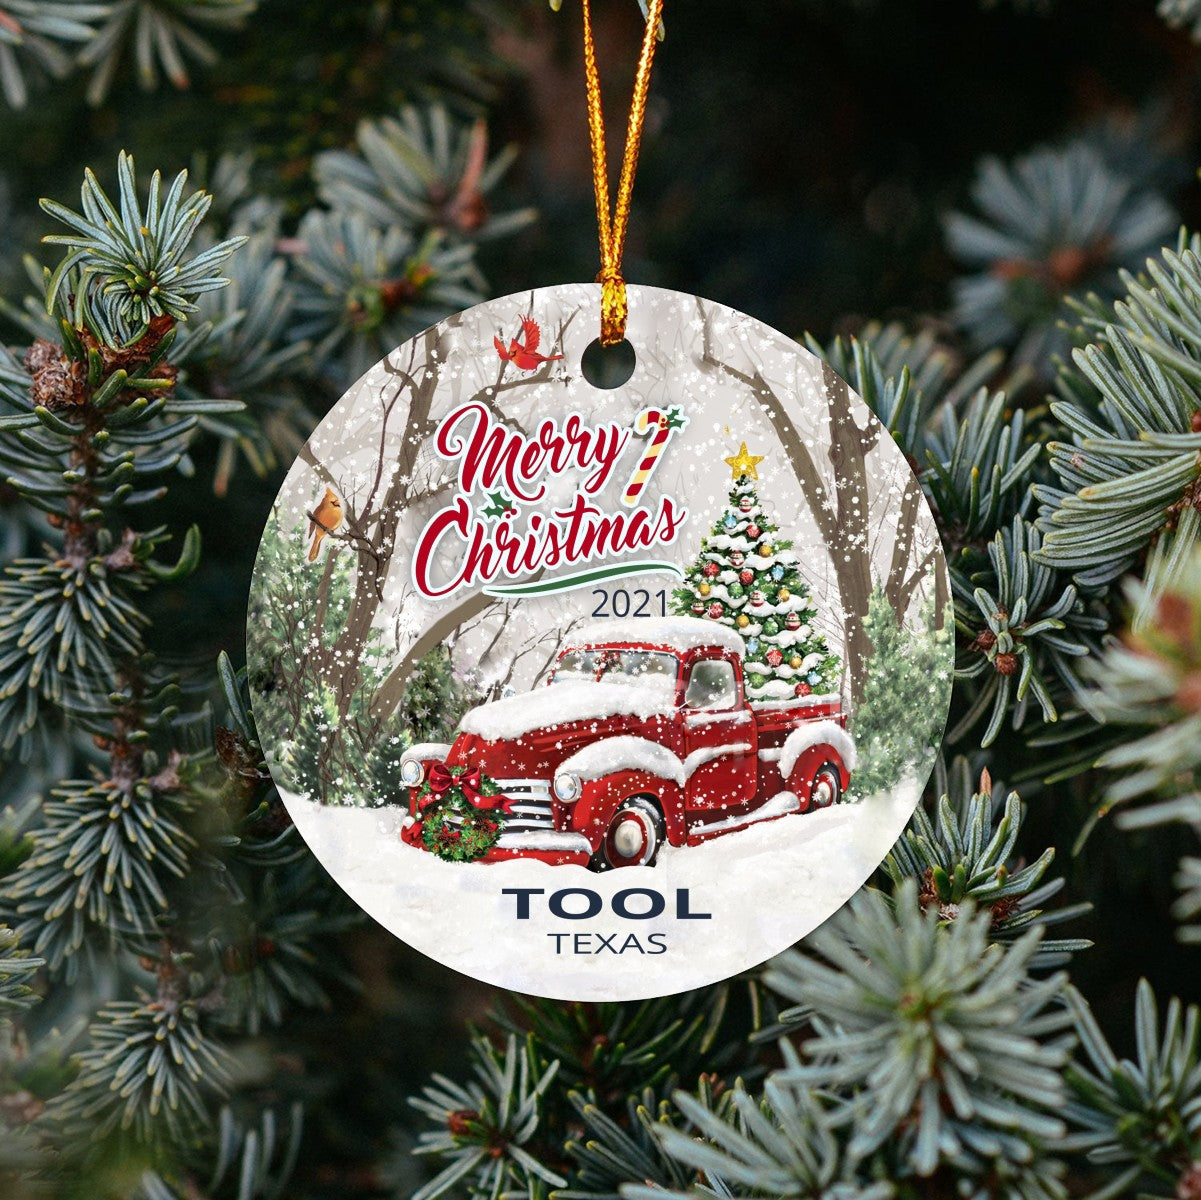 Christmas Tree Ornaments Tool - Ornament With Name City, State Tool Texas TX Ornament - Red Truck Xmas Ornaments 3'' Plastic Gift For Family, Friend And Housewarming